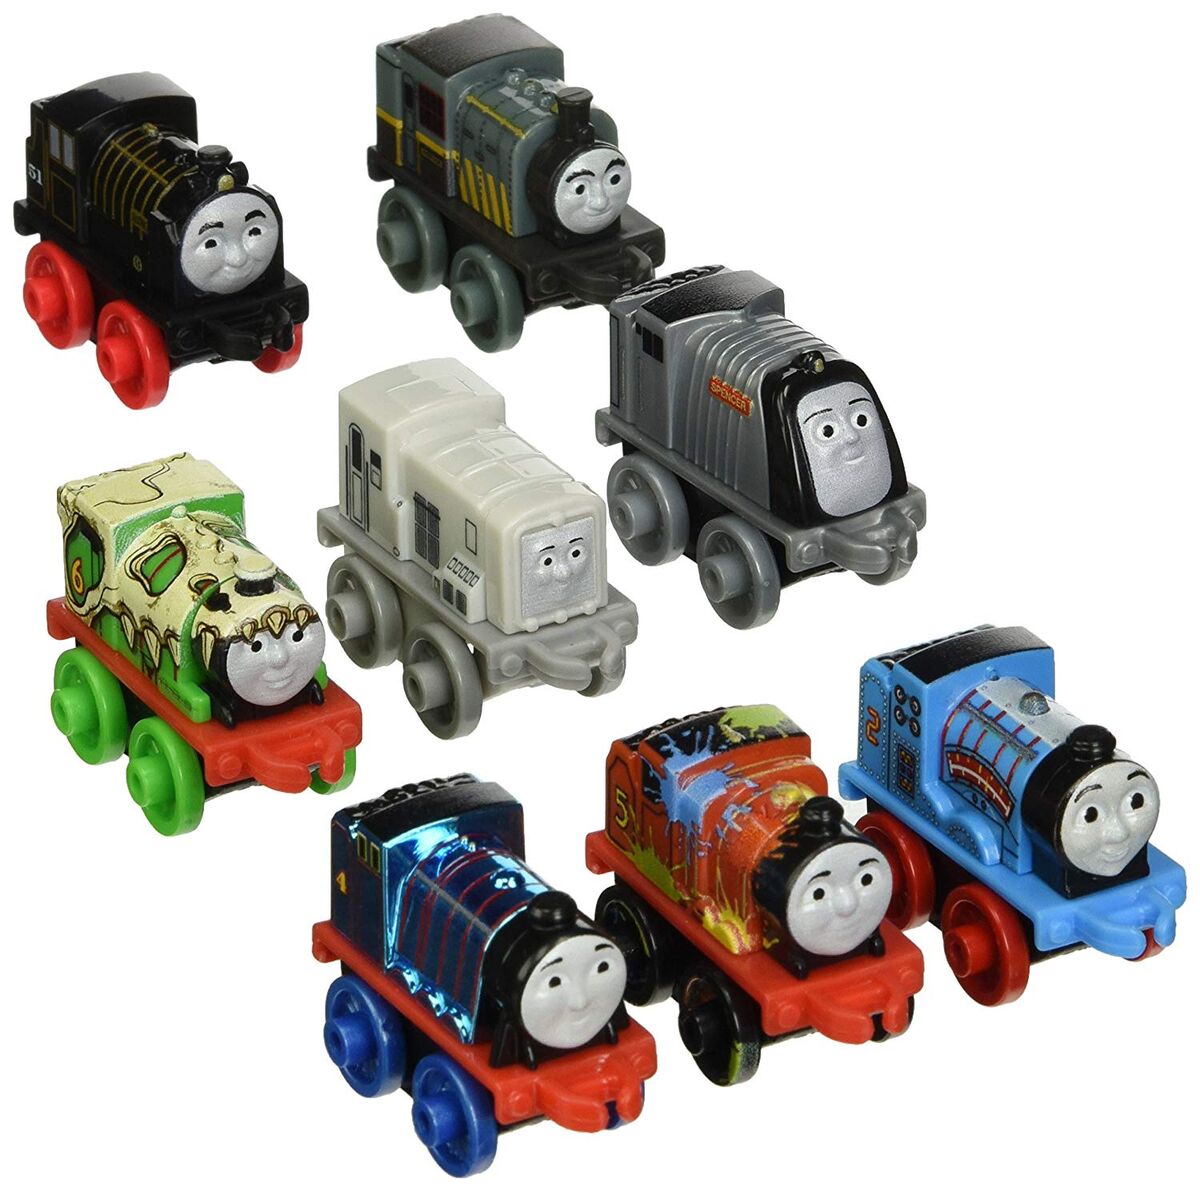 8-Pack 1 | Thomas and Friends MINIS Wiki | Fandom